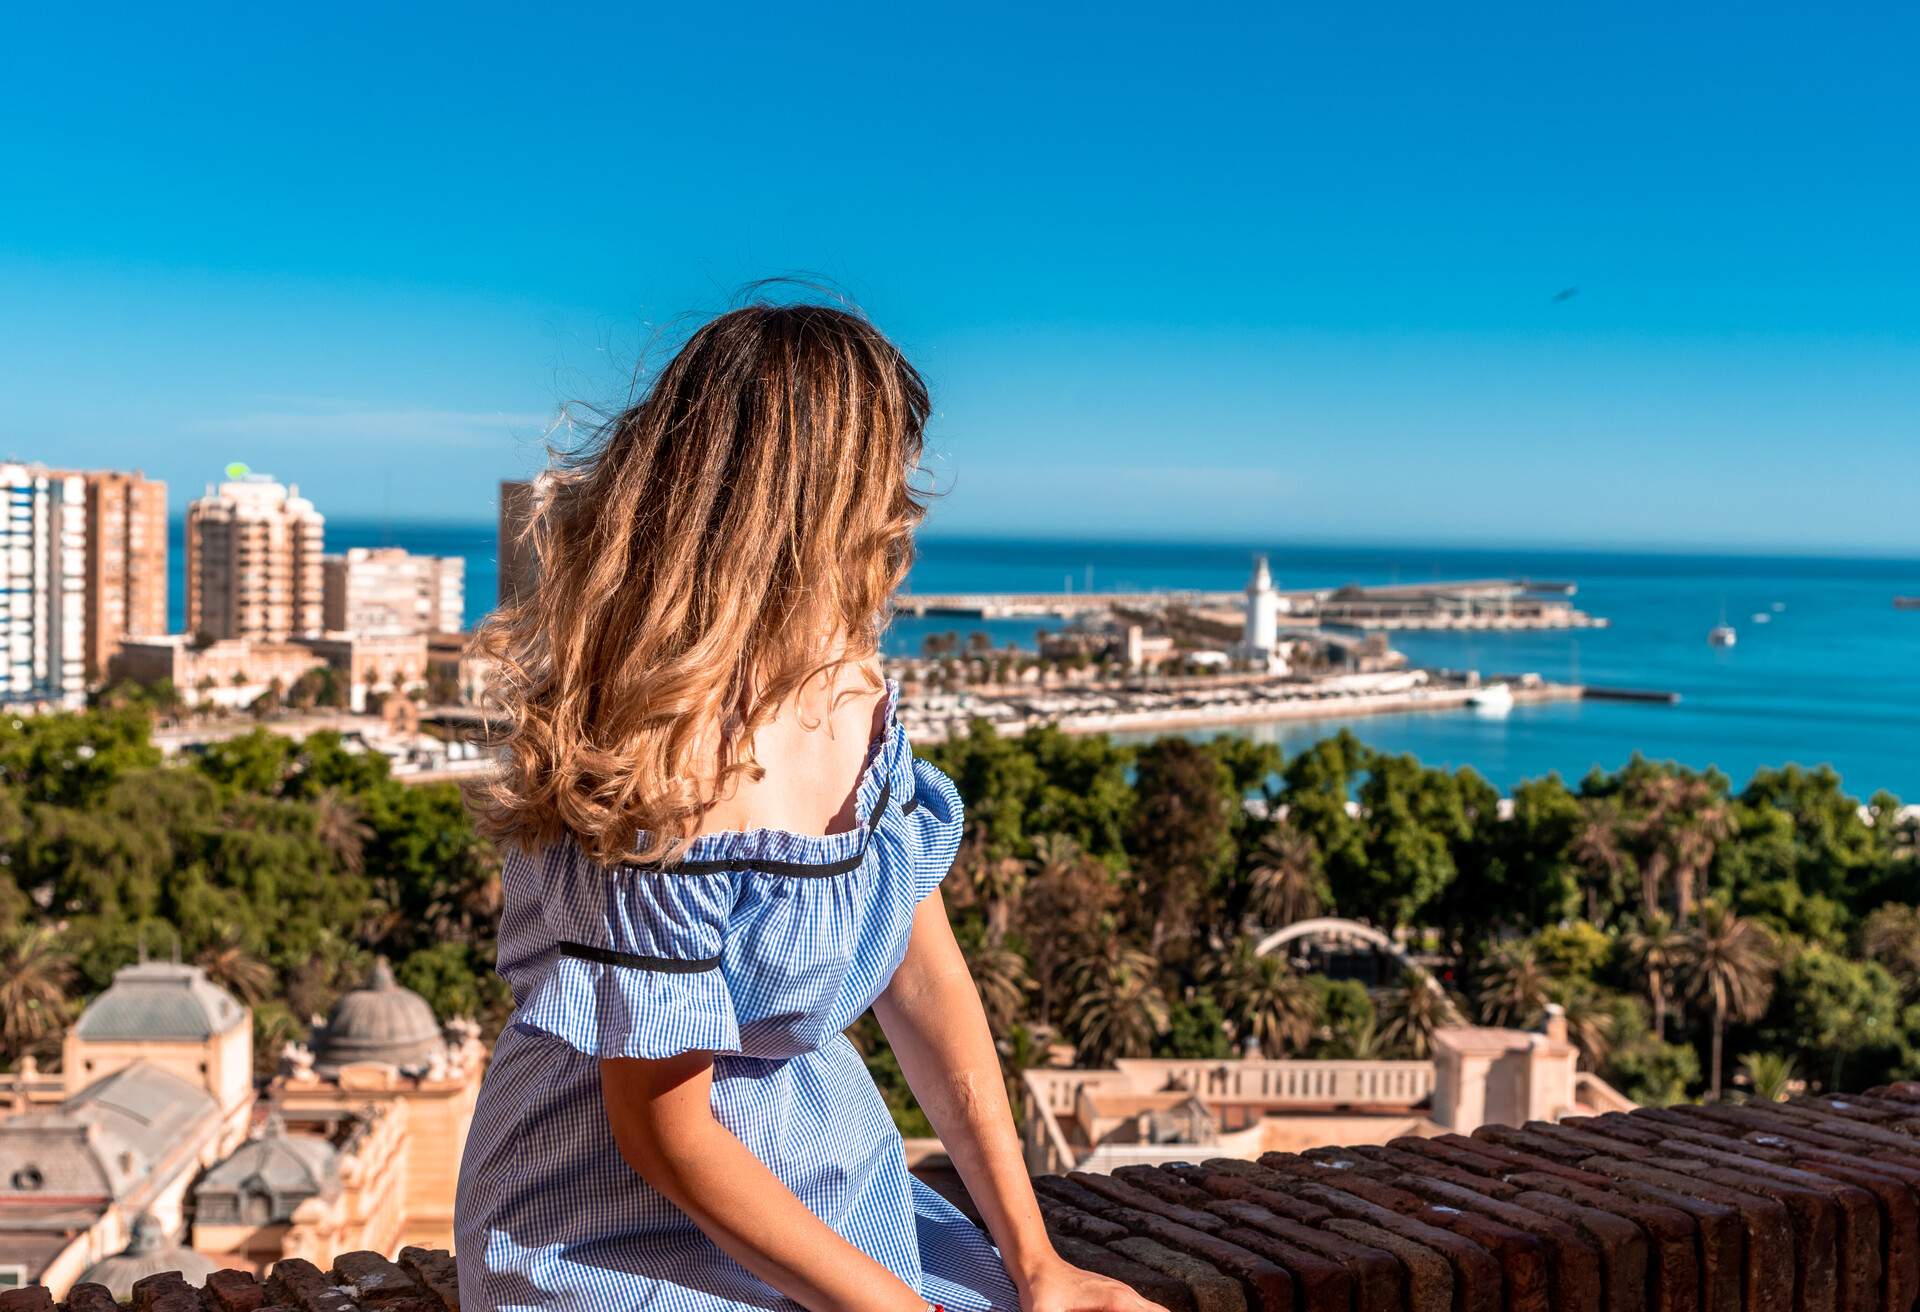 A woman in a blue dress looks at classic seaside cityscape from a vantage point.